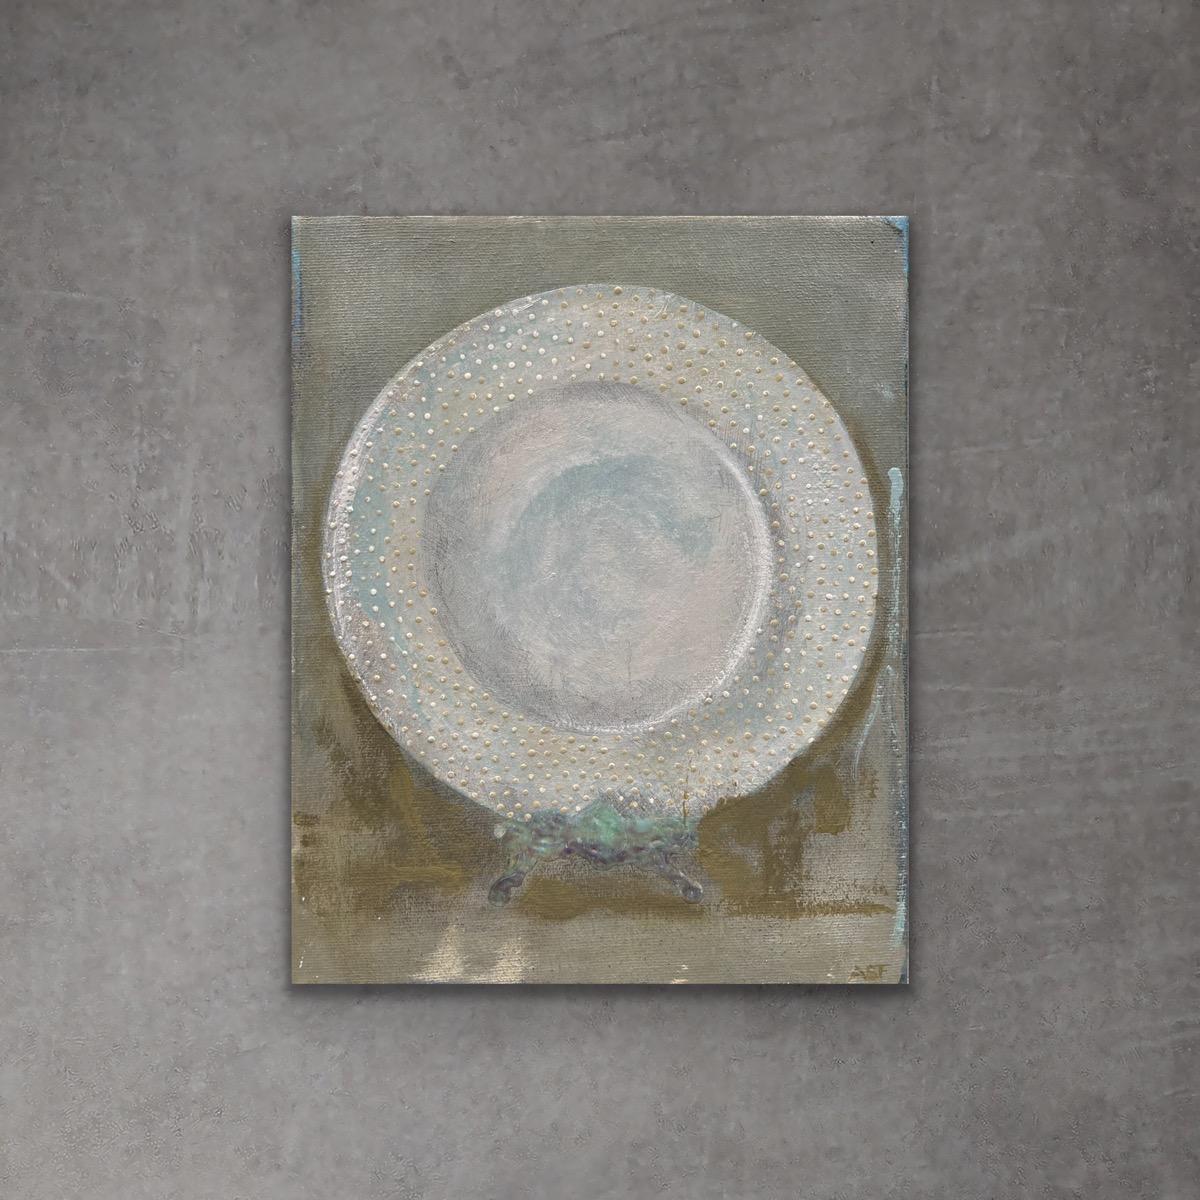 Dinner Plate 3 - 8"x10", Still Life Painting On Canvas, Neutral, White